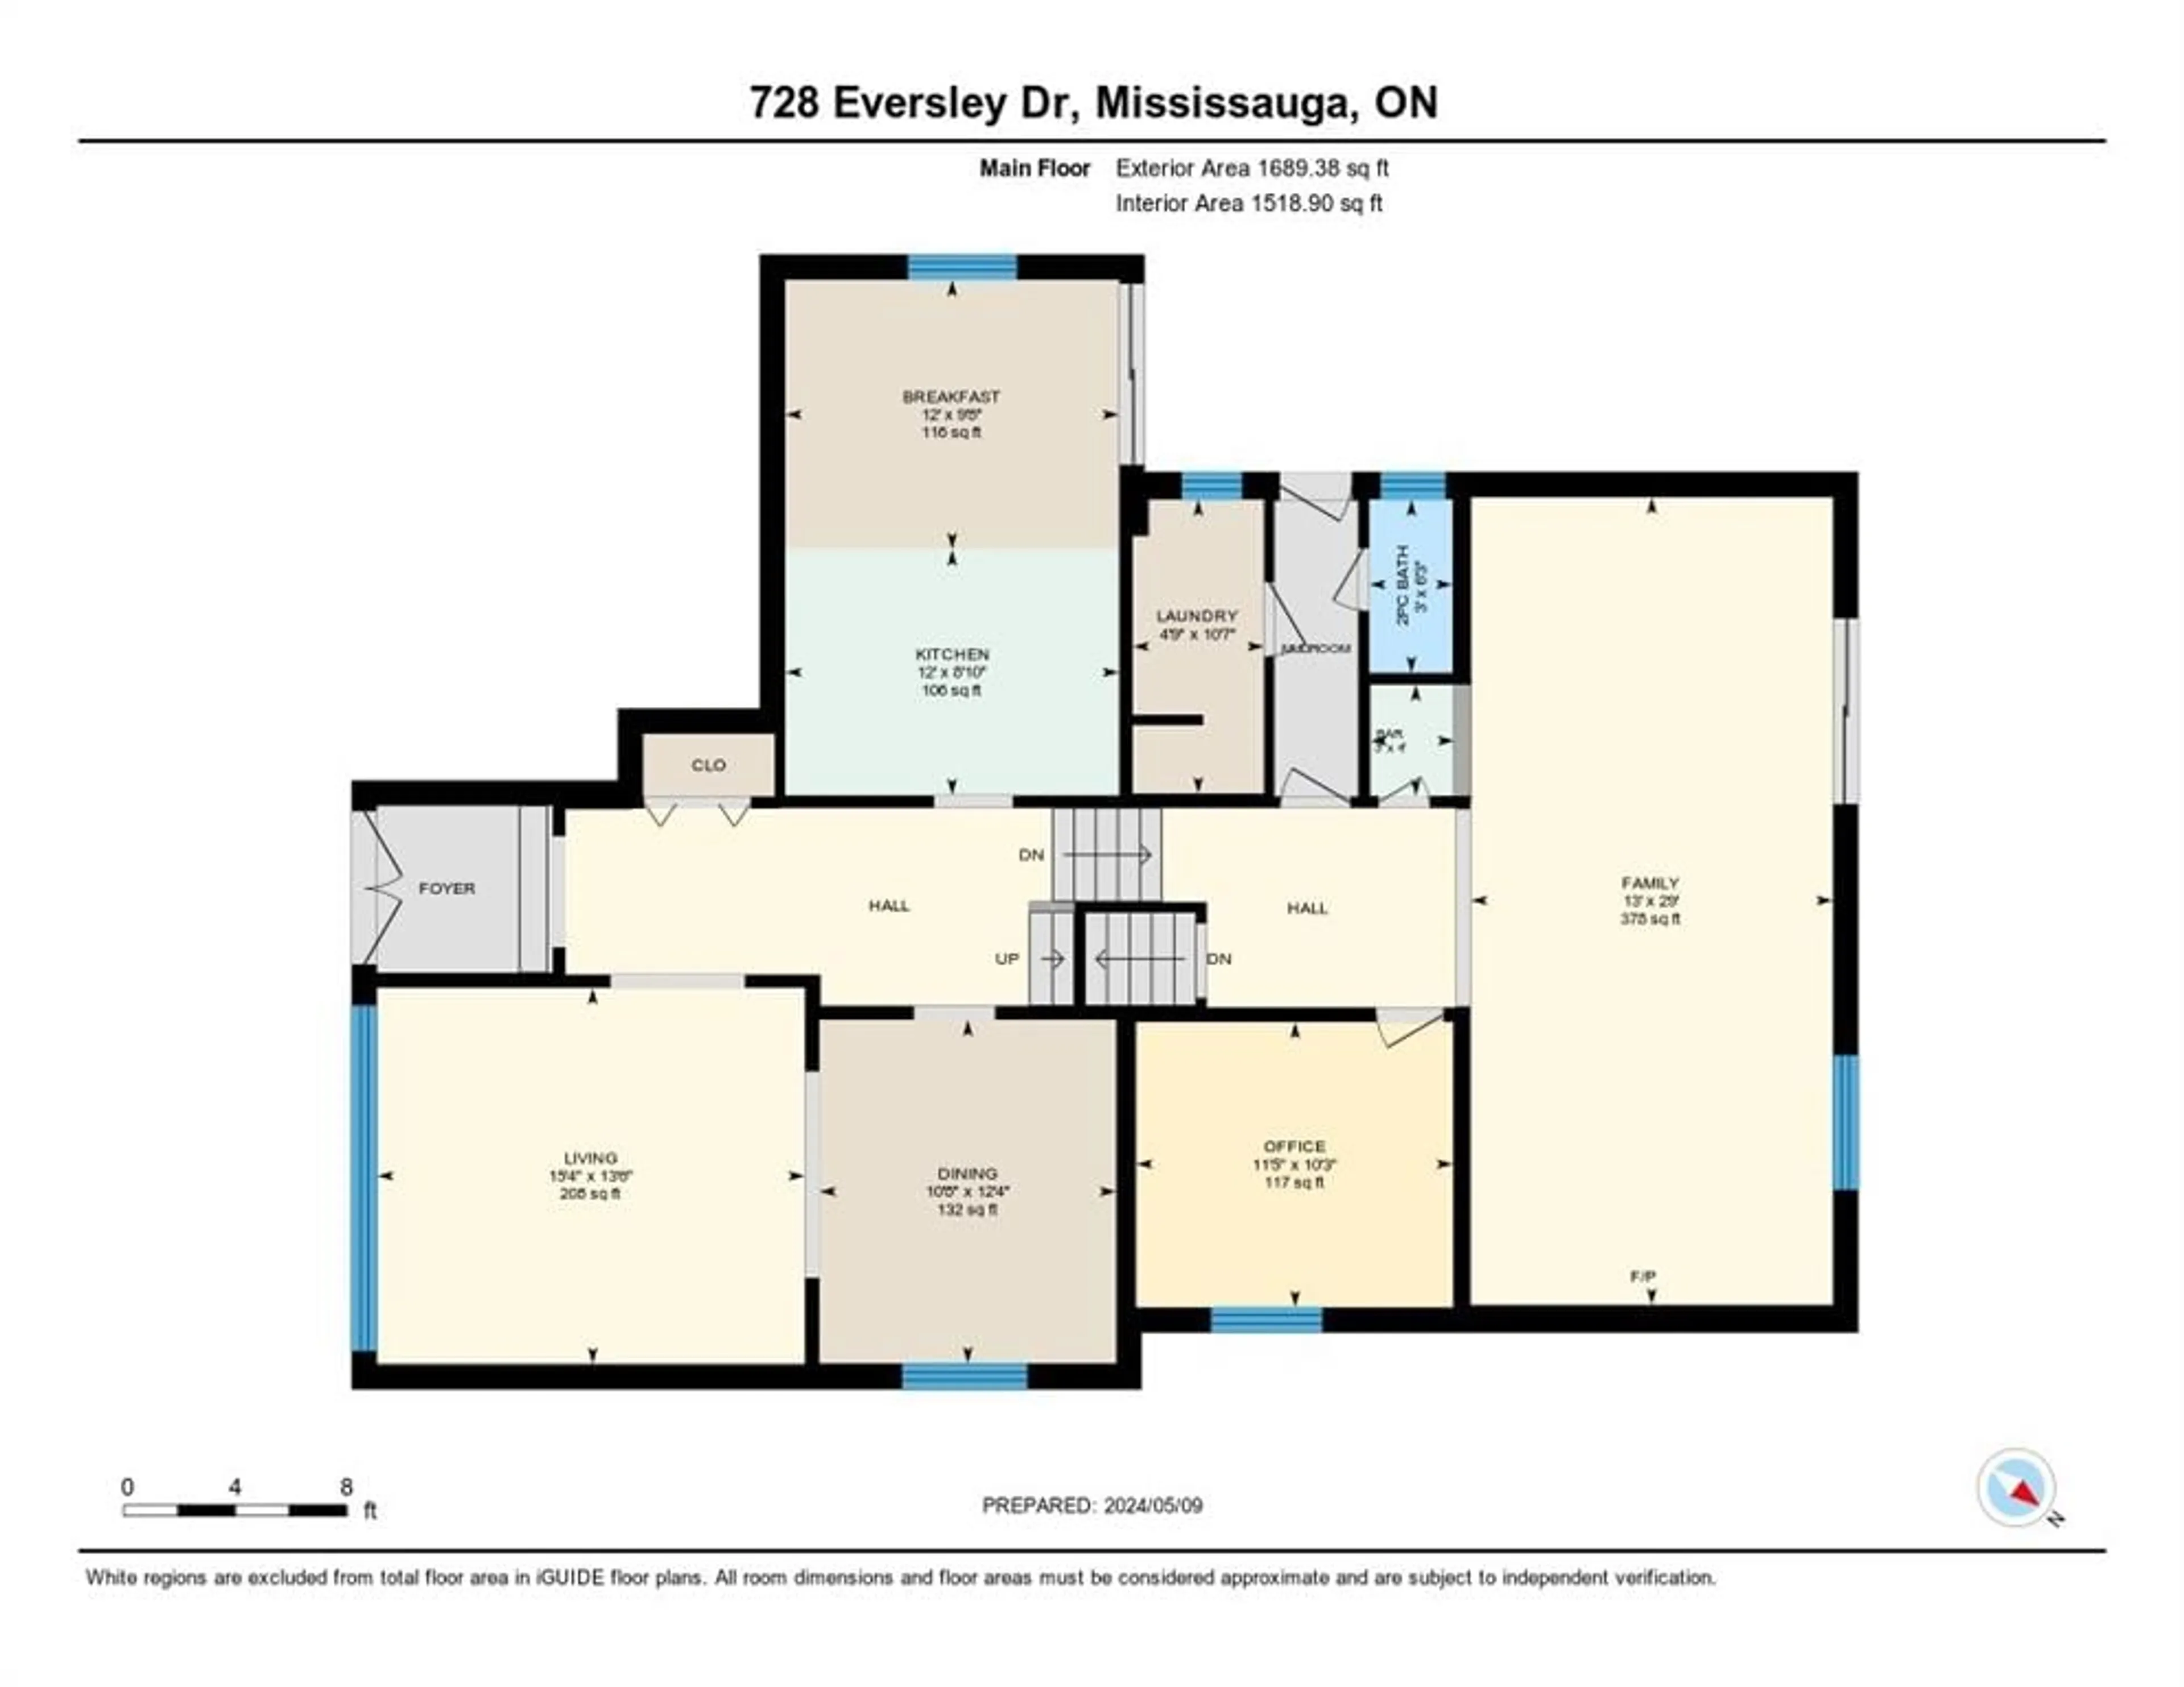 Floor plan for 728 EVERSLEY Dr, Mississauga Ontario L5A 2C9